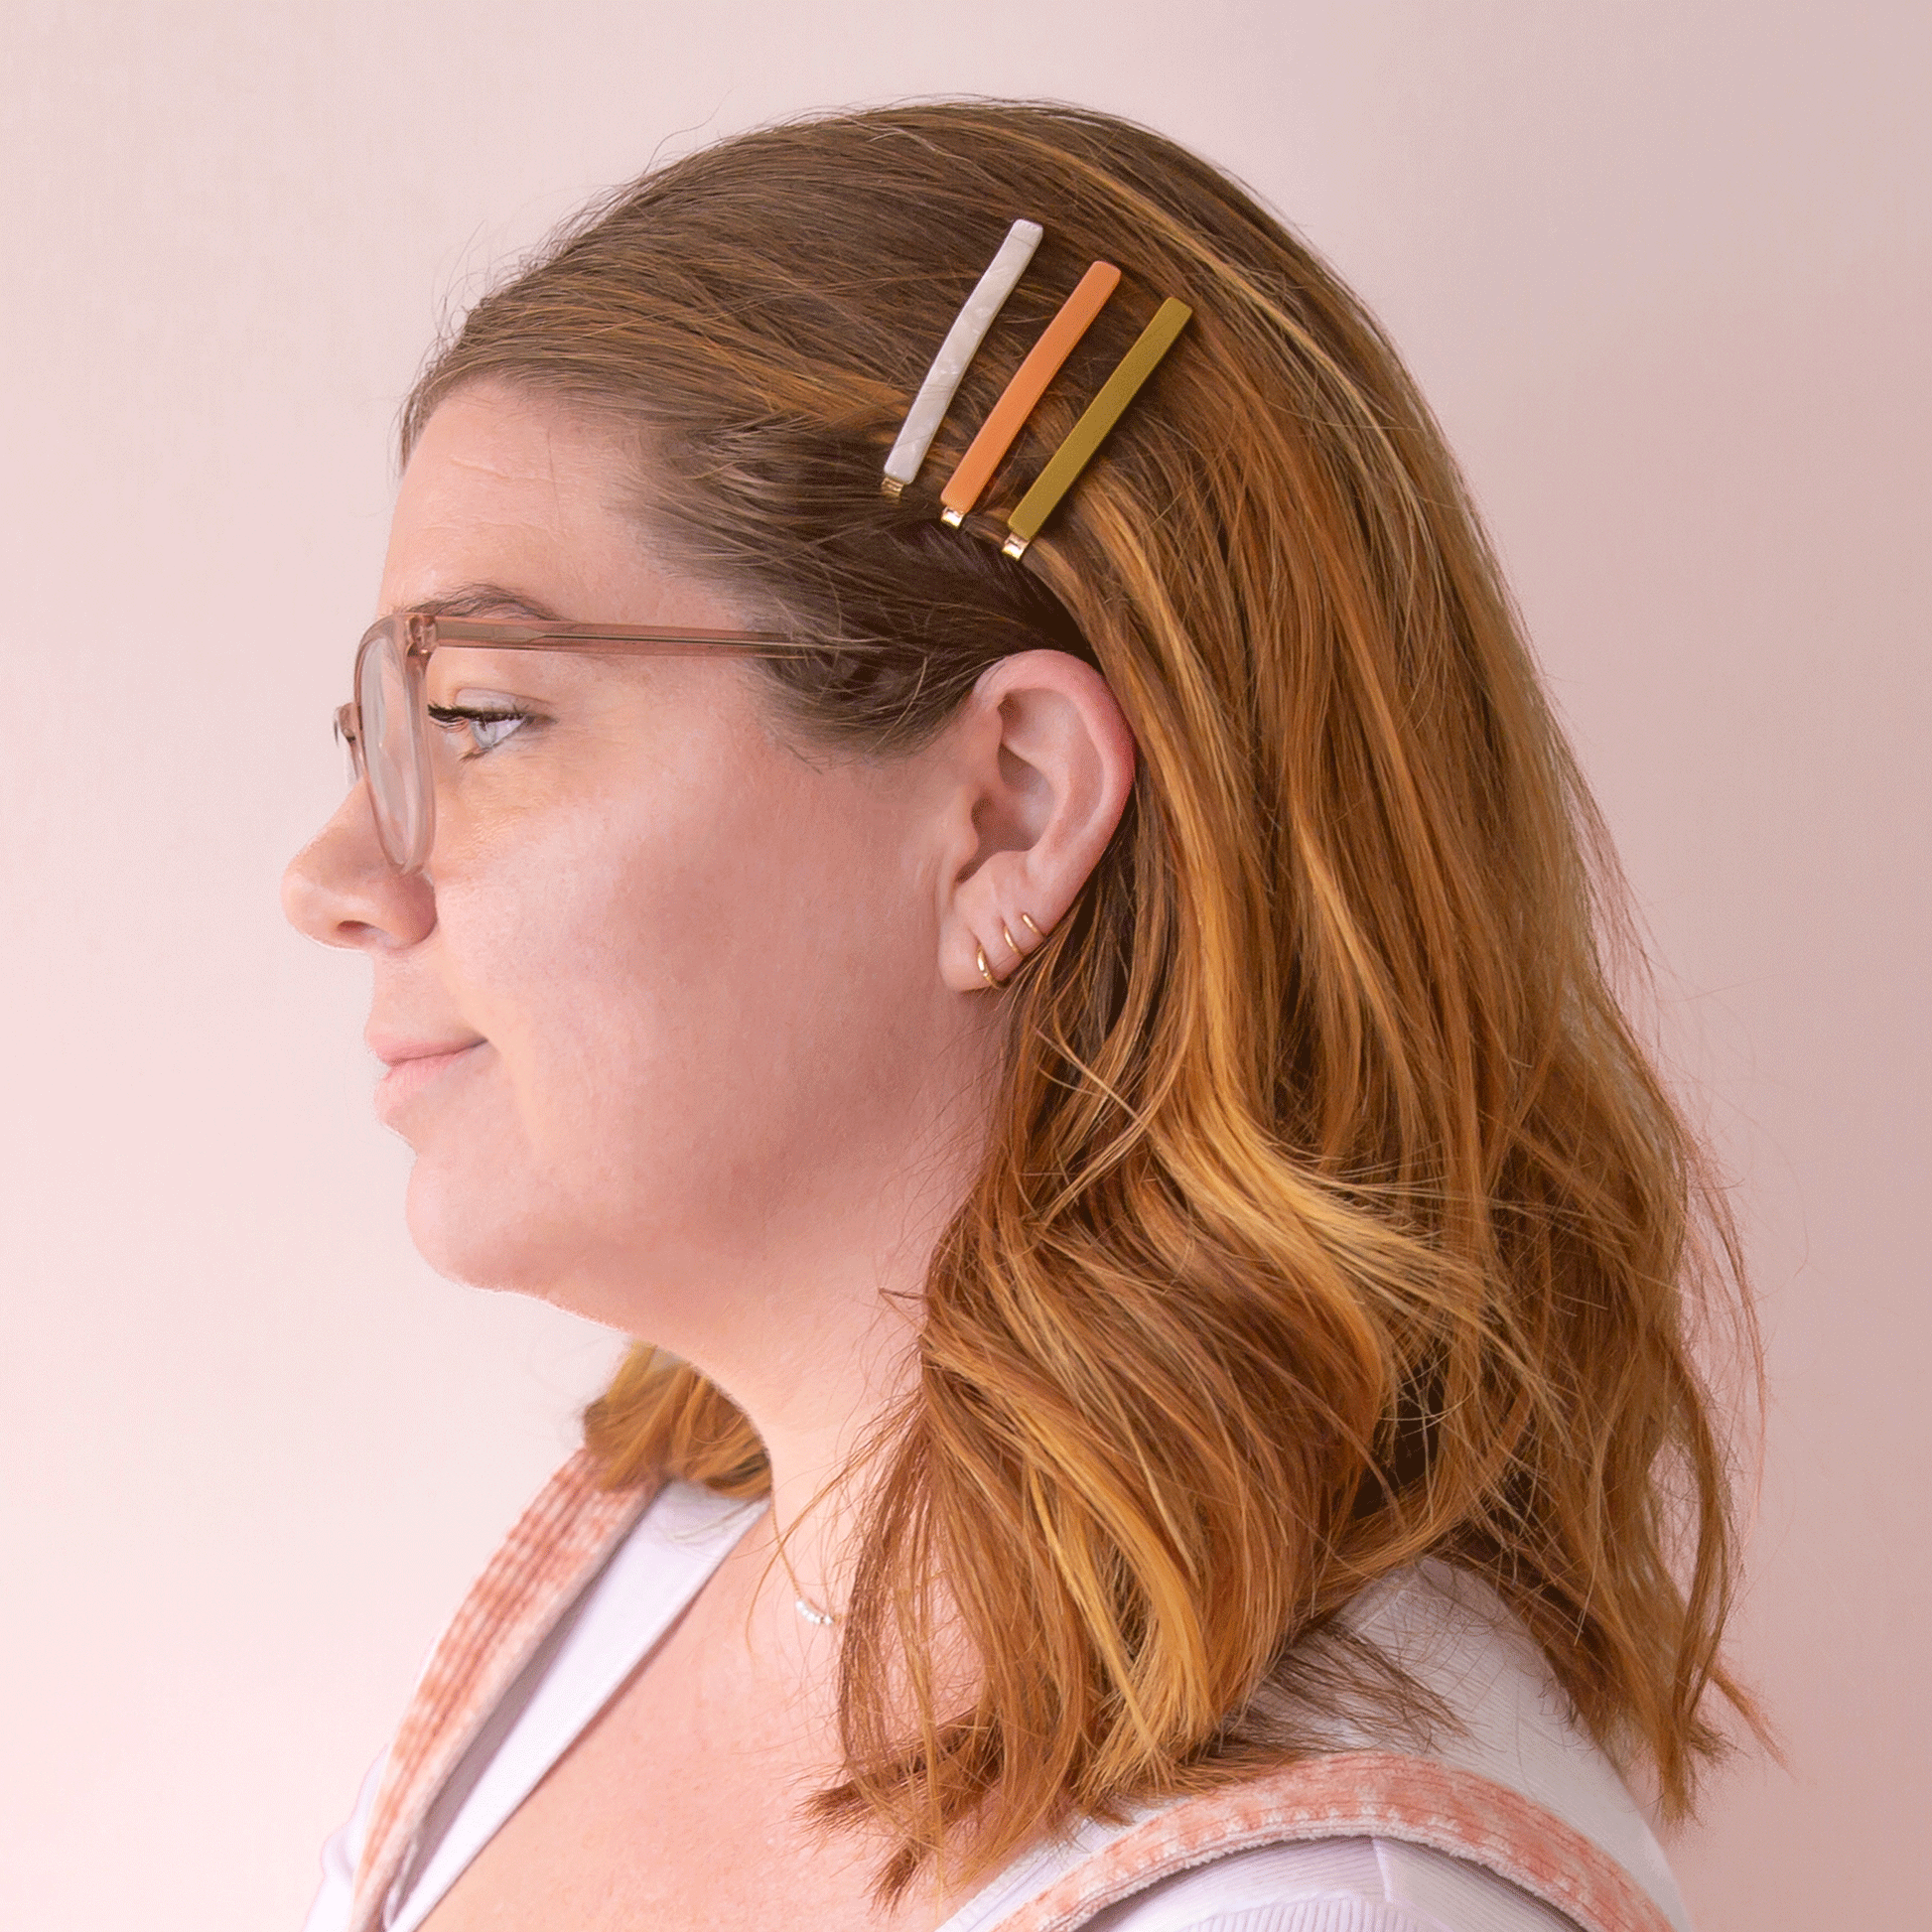 Three acetate bobby pins from top to bottom is an ivory shell shade, mango orange, and olive green shade.